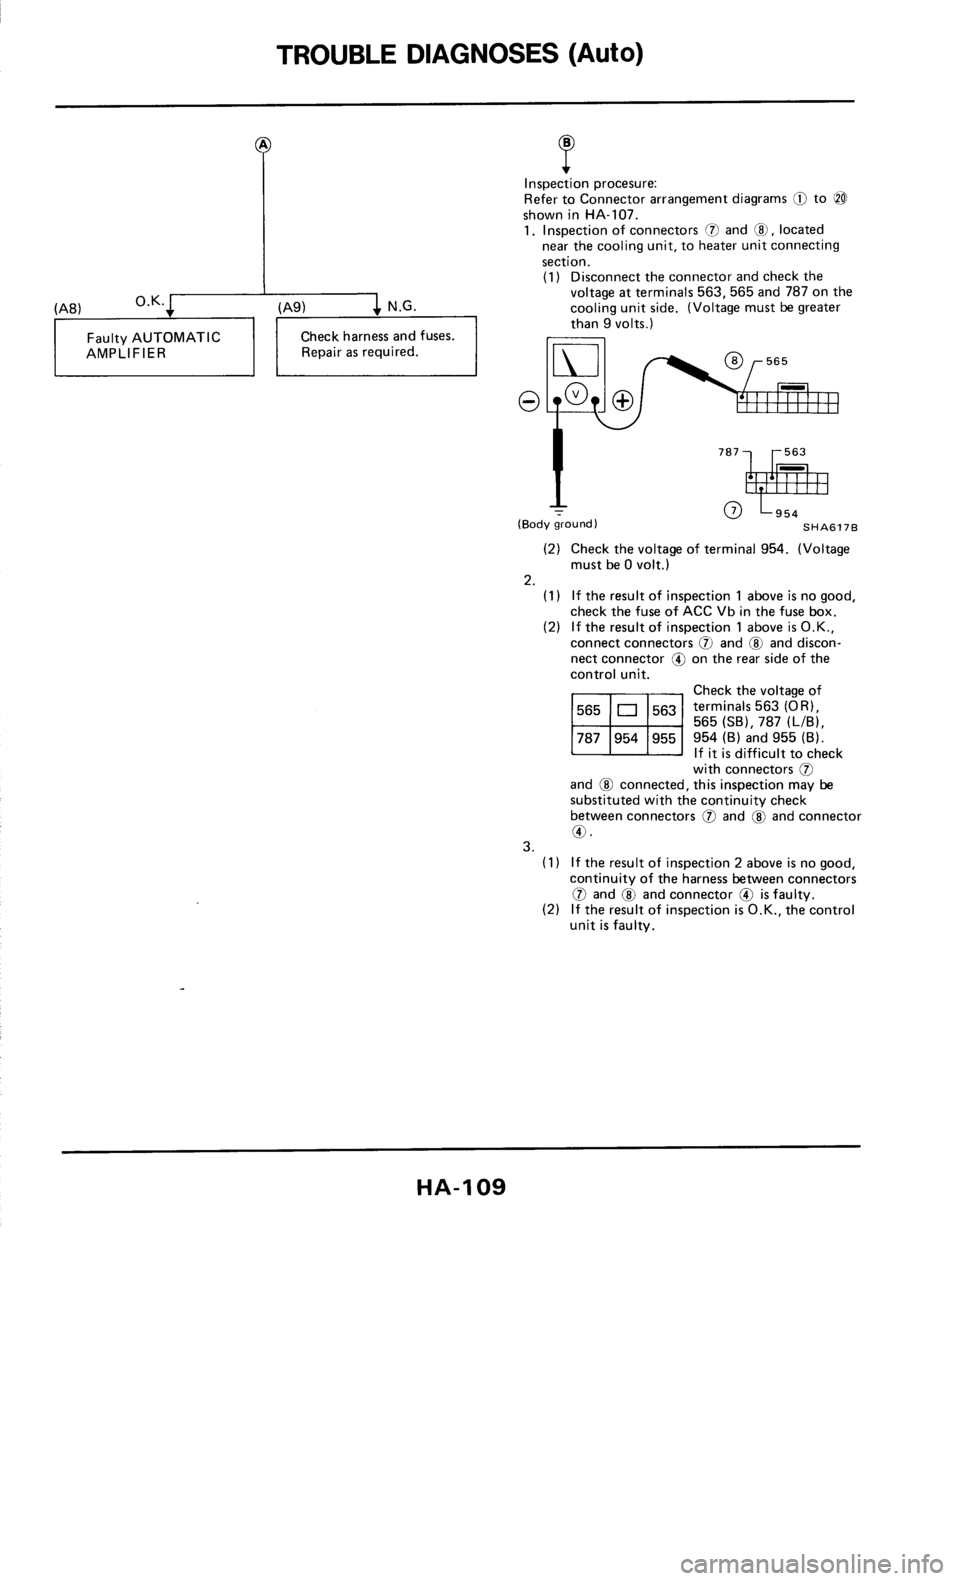 NISSAN 300ZX 1985 Z31 Heather And Air Conditioner Workshop Manual 